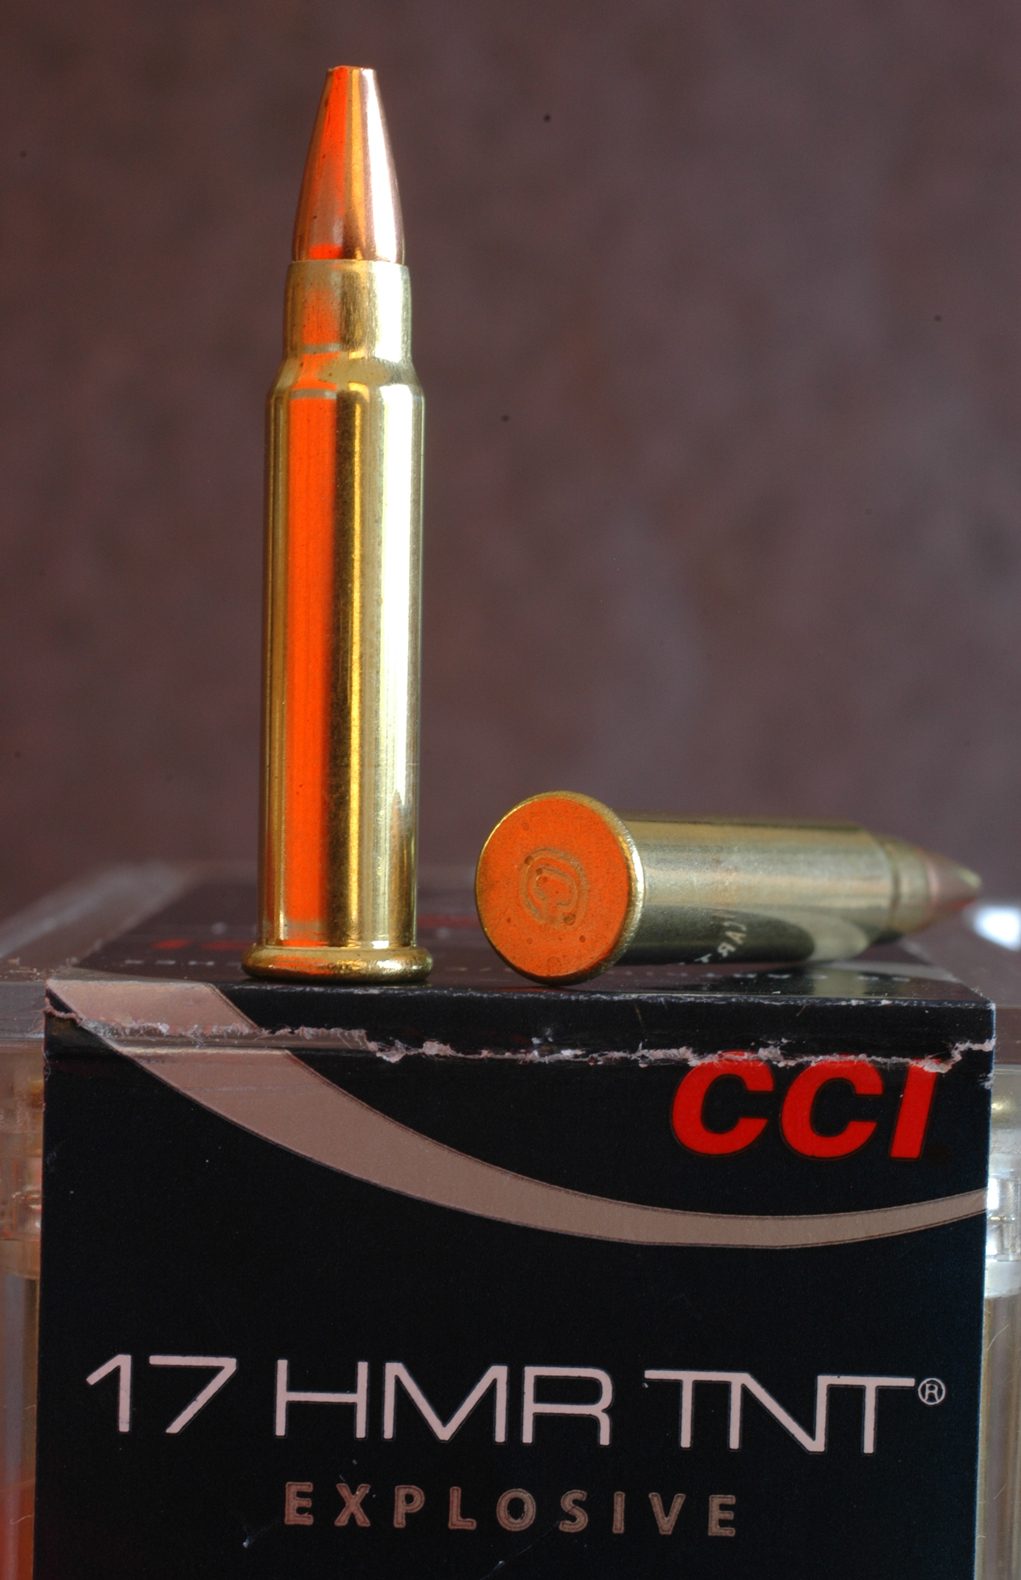 You can get a B Series Hardwood in .17 HMR, too — a superbly accurate round built on the .22 WMR hull.